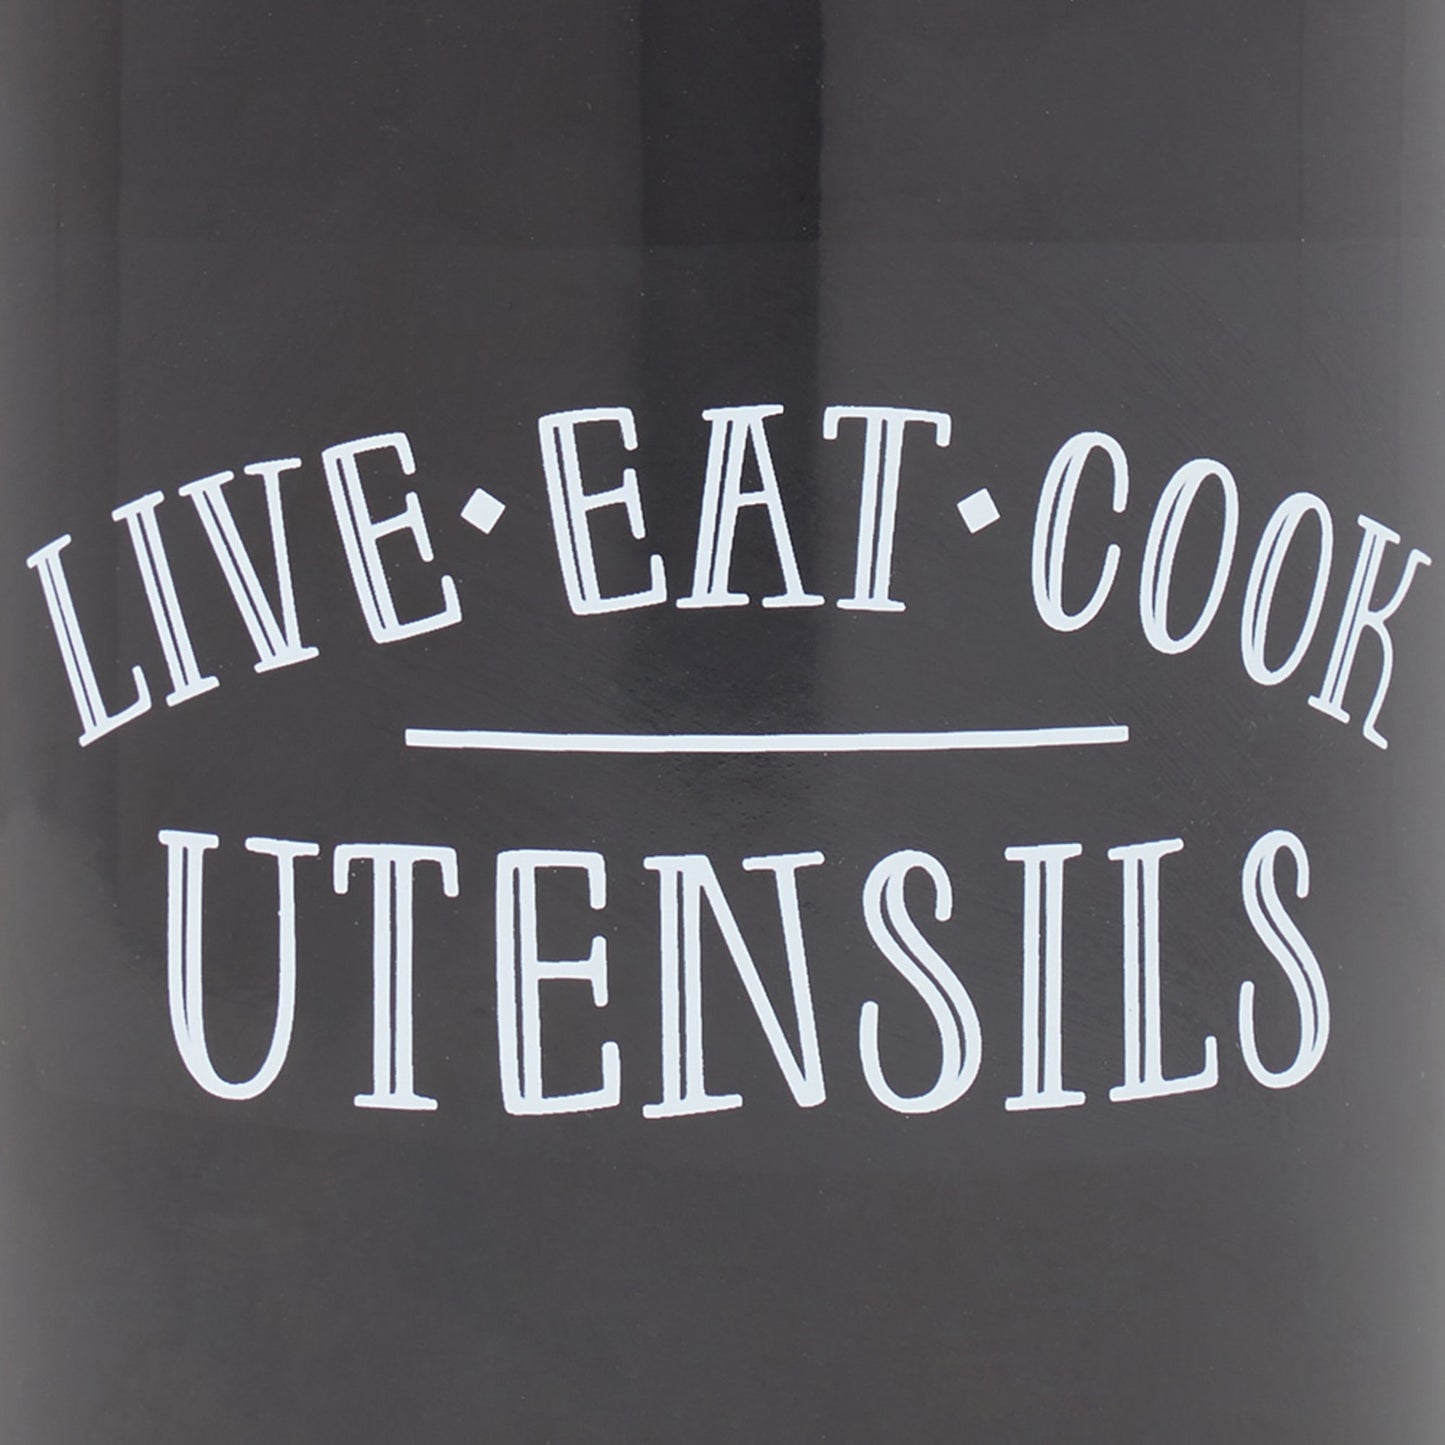 Live Eat and Cook Ceramic Cutlery Holder with Steel Rim, Black